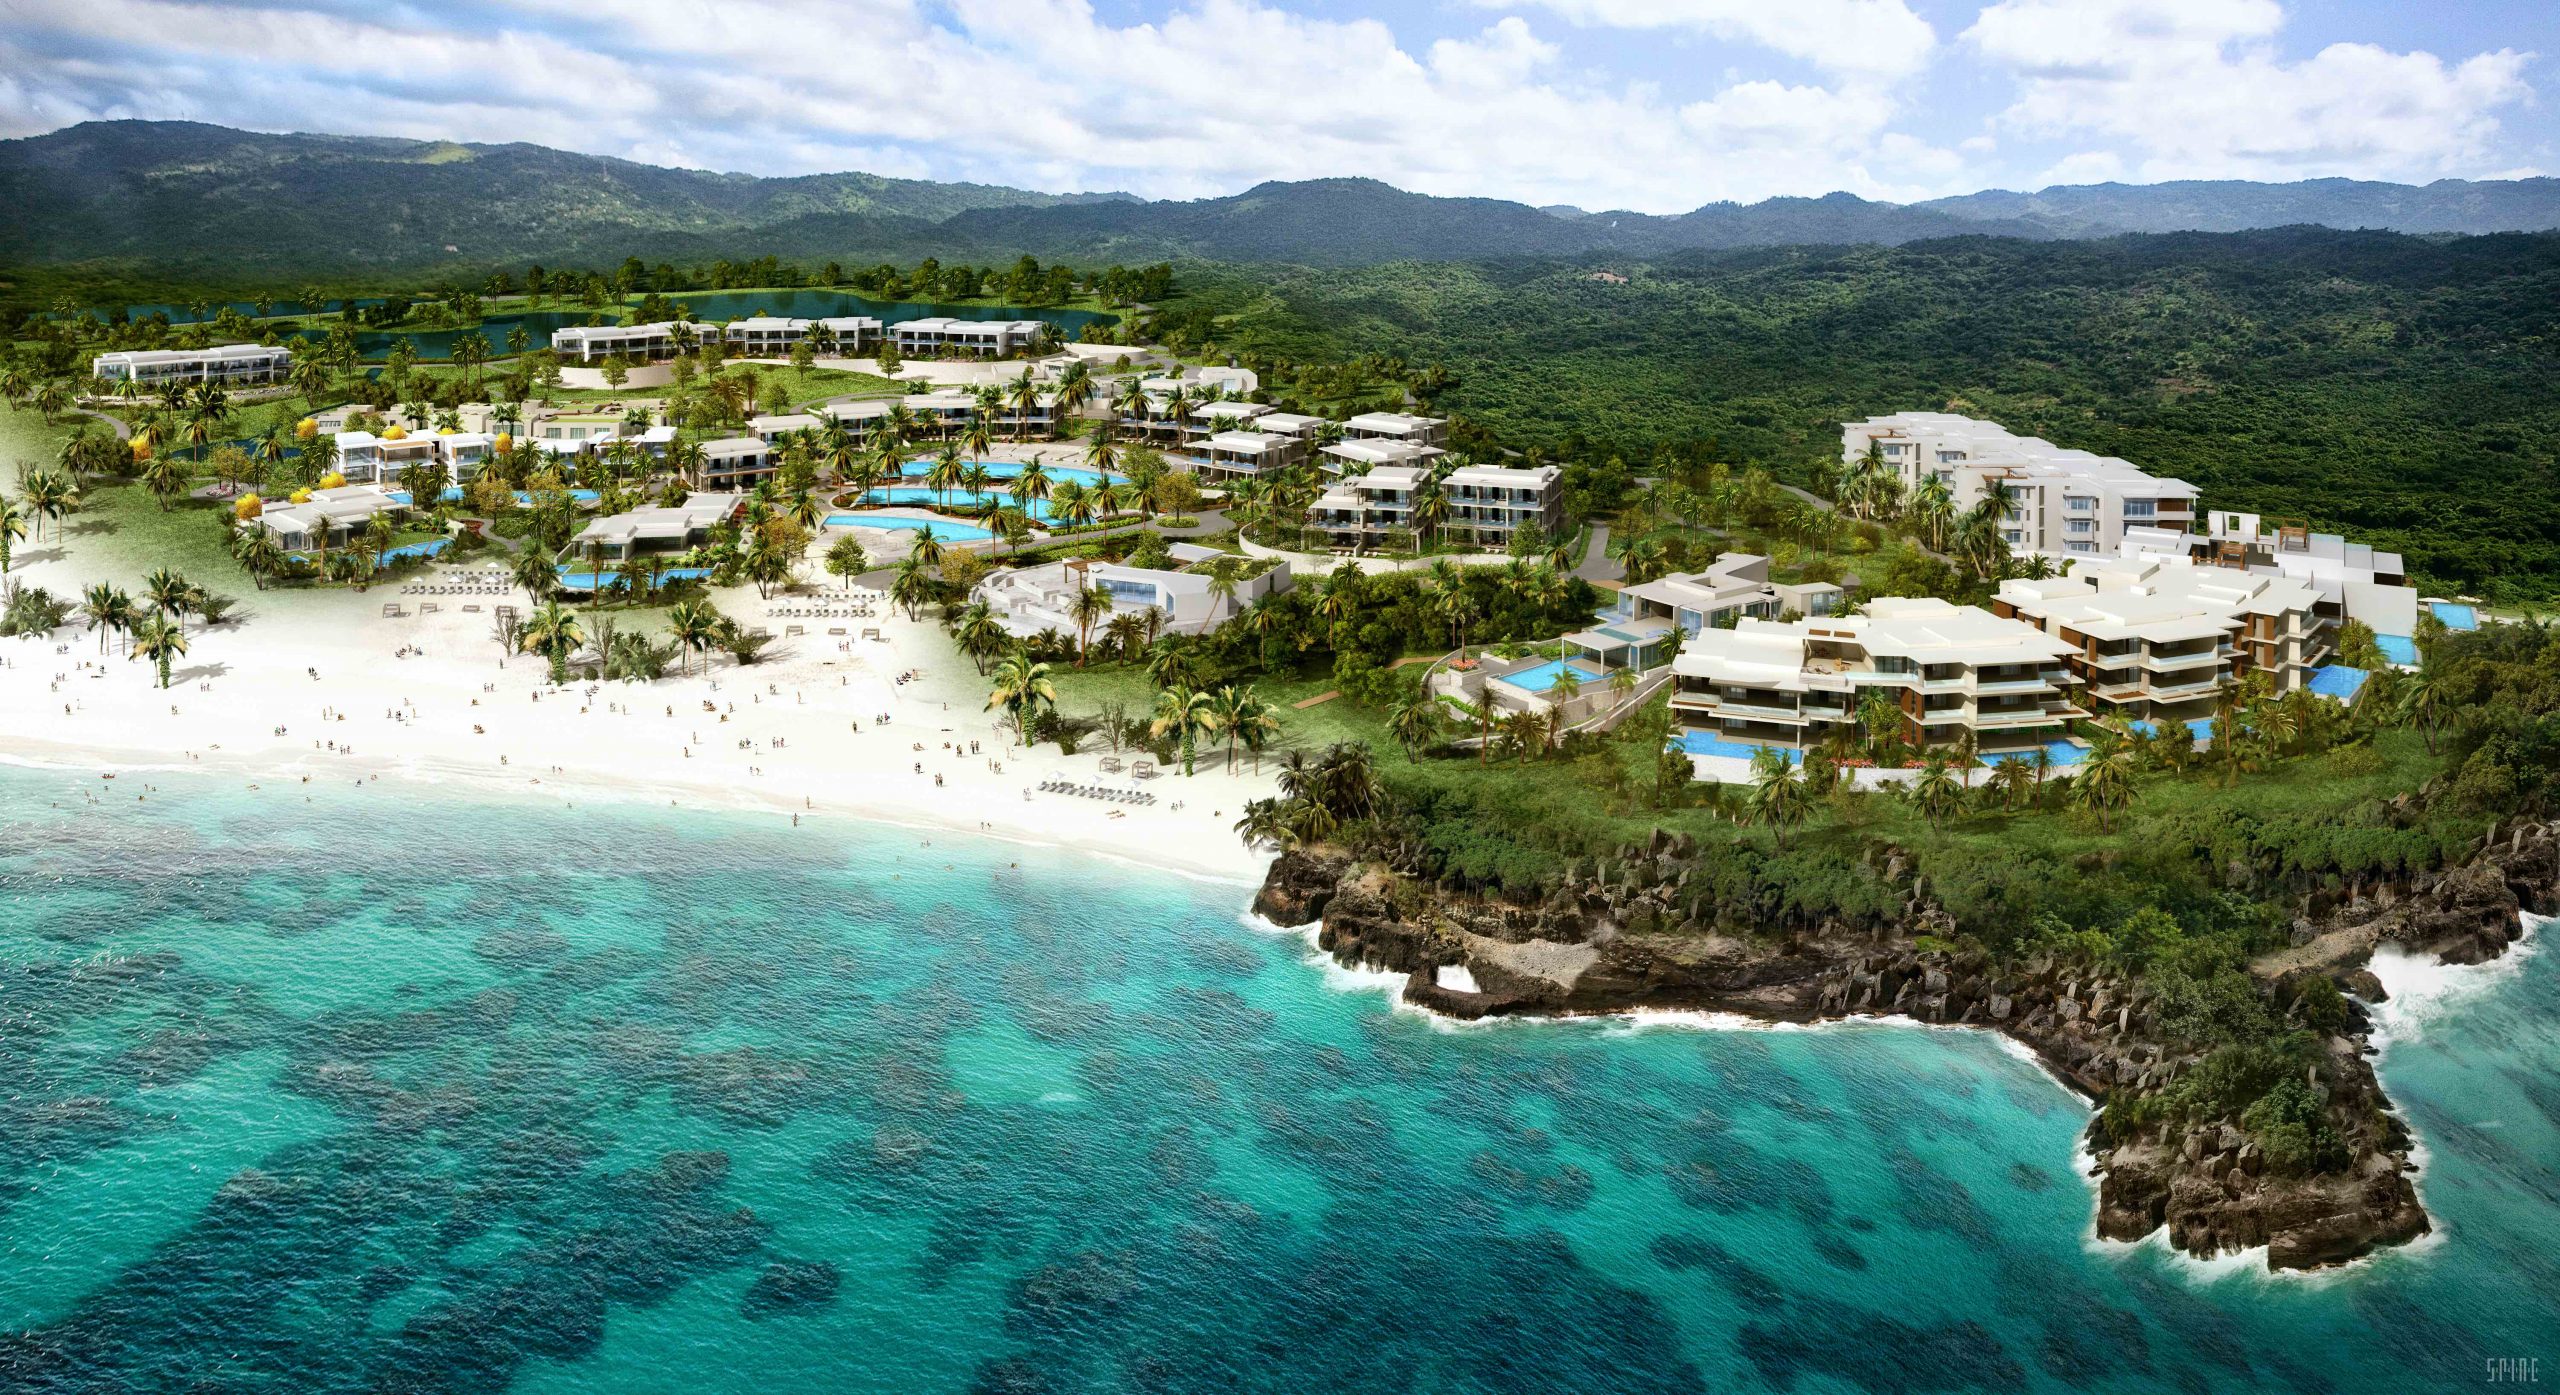 here, at Punta de Mita, developer Mark Cooley is putting the finishing touches on a series of villas and condos that cascade down a six-degree slope of tropical jungle toward pristine waters.